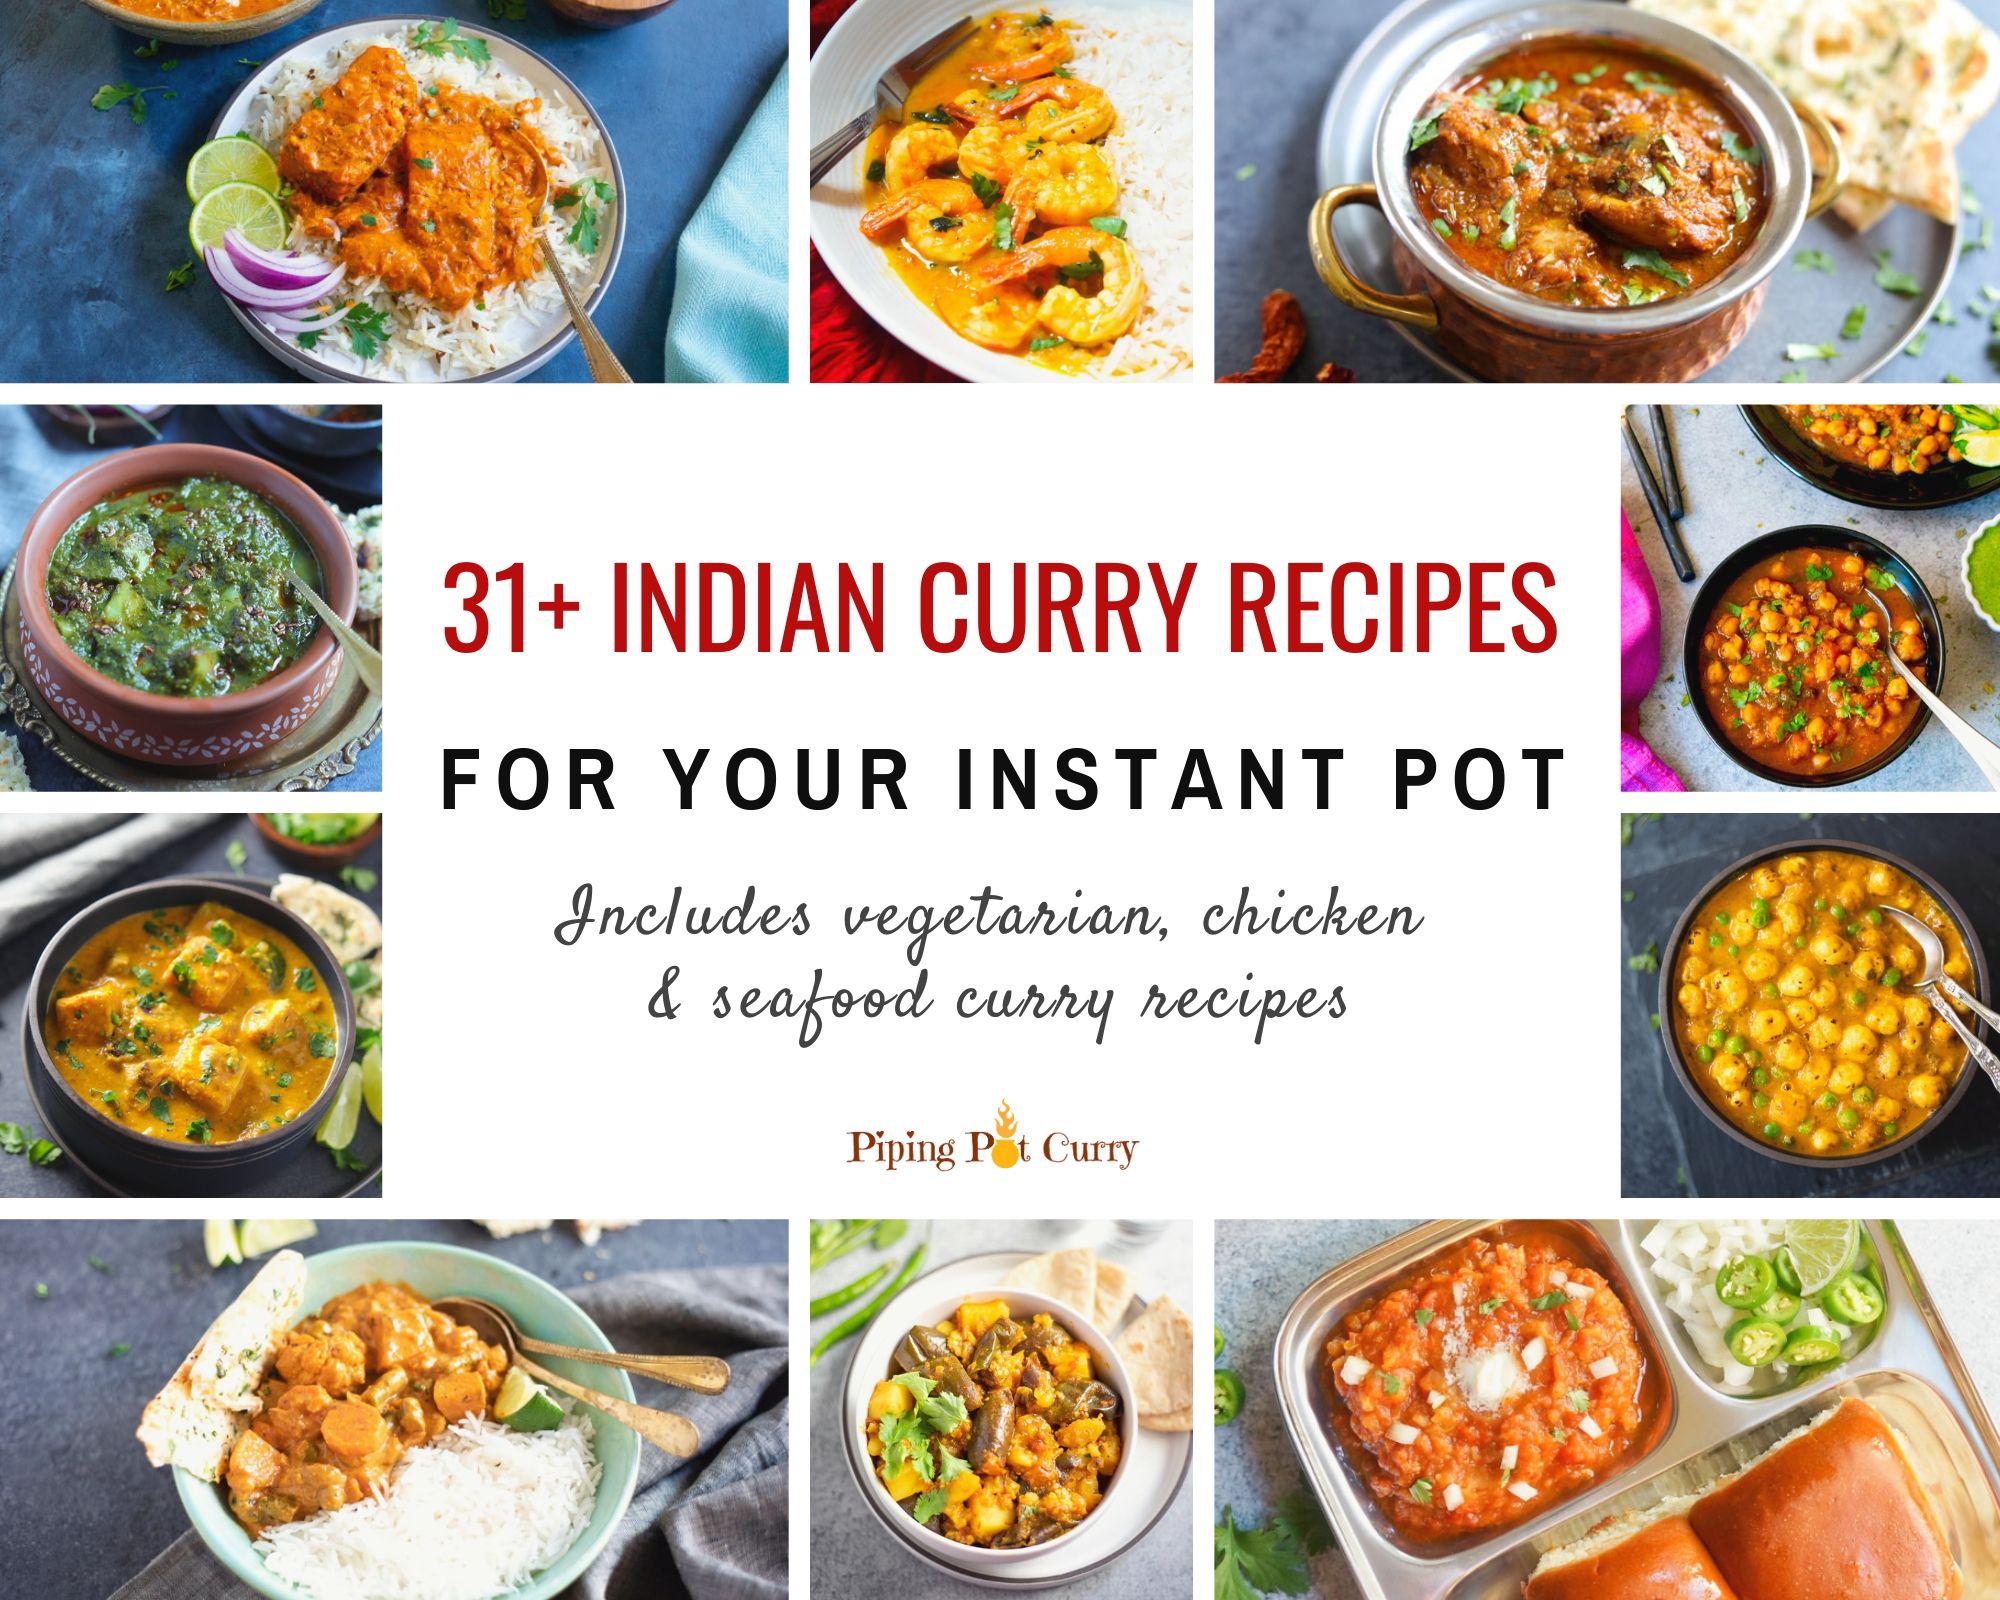 The Ultimate Guide to Pot-In-Pot Cooking with Instant Pot - Piping Pot Curry